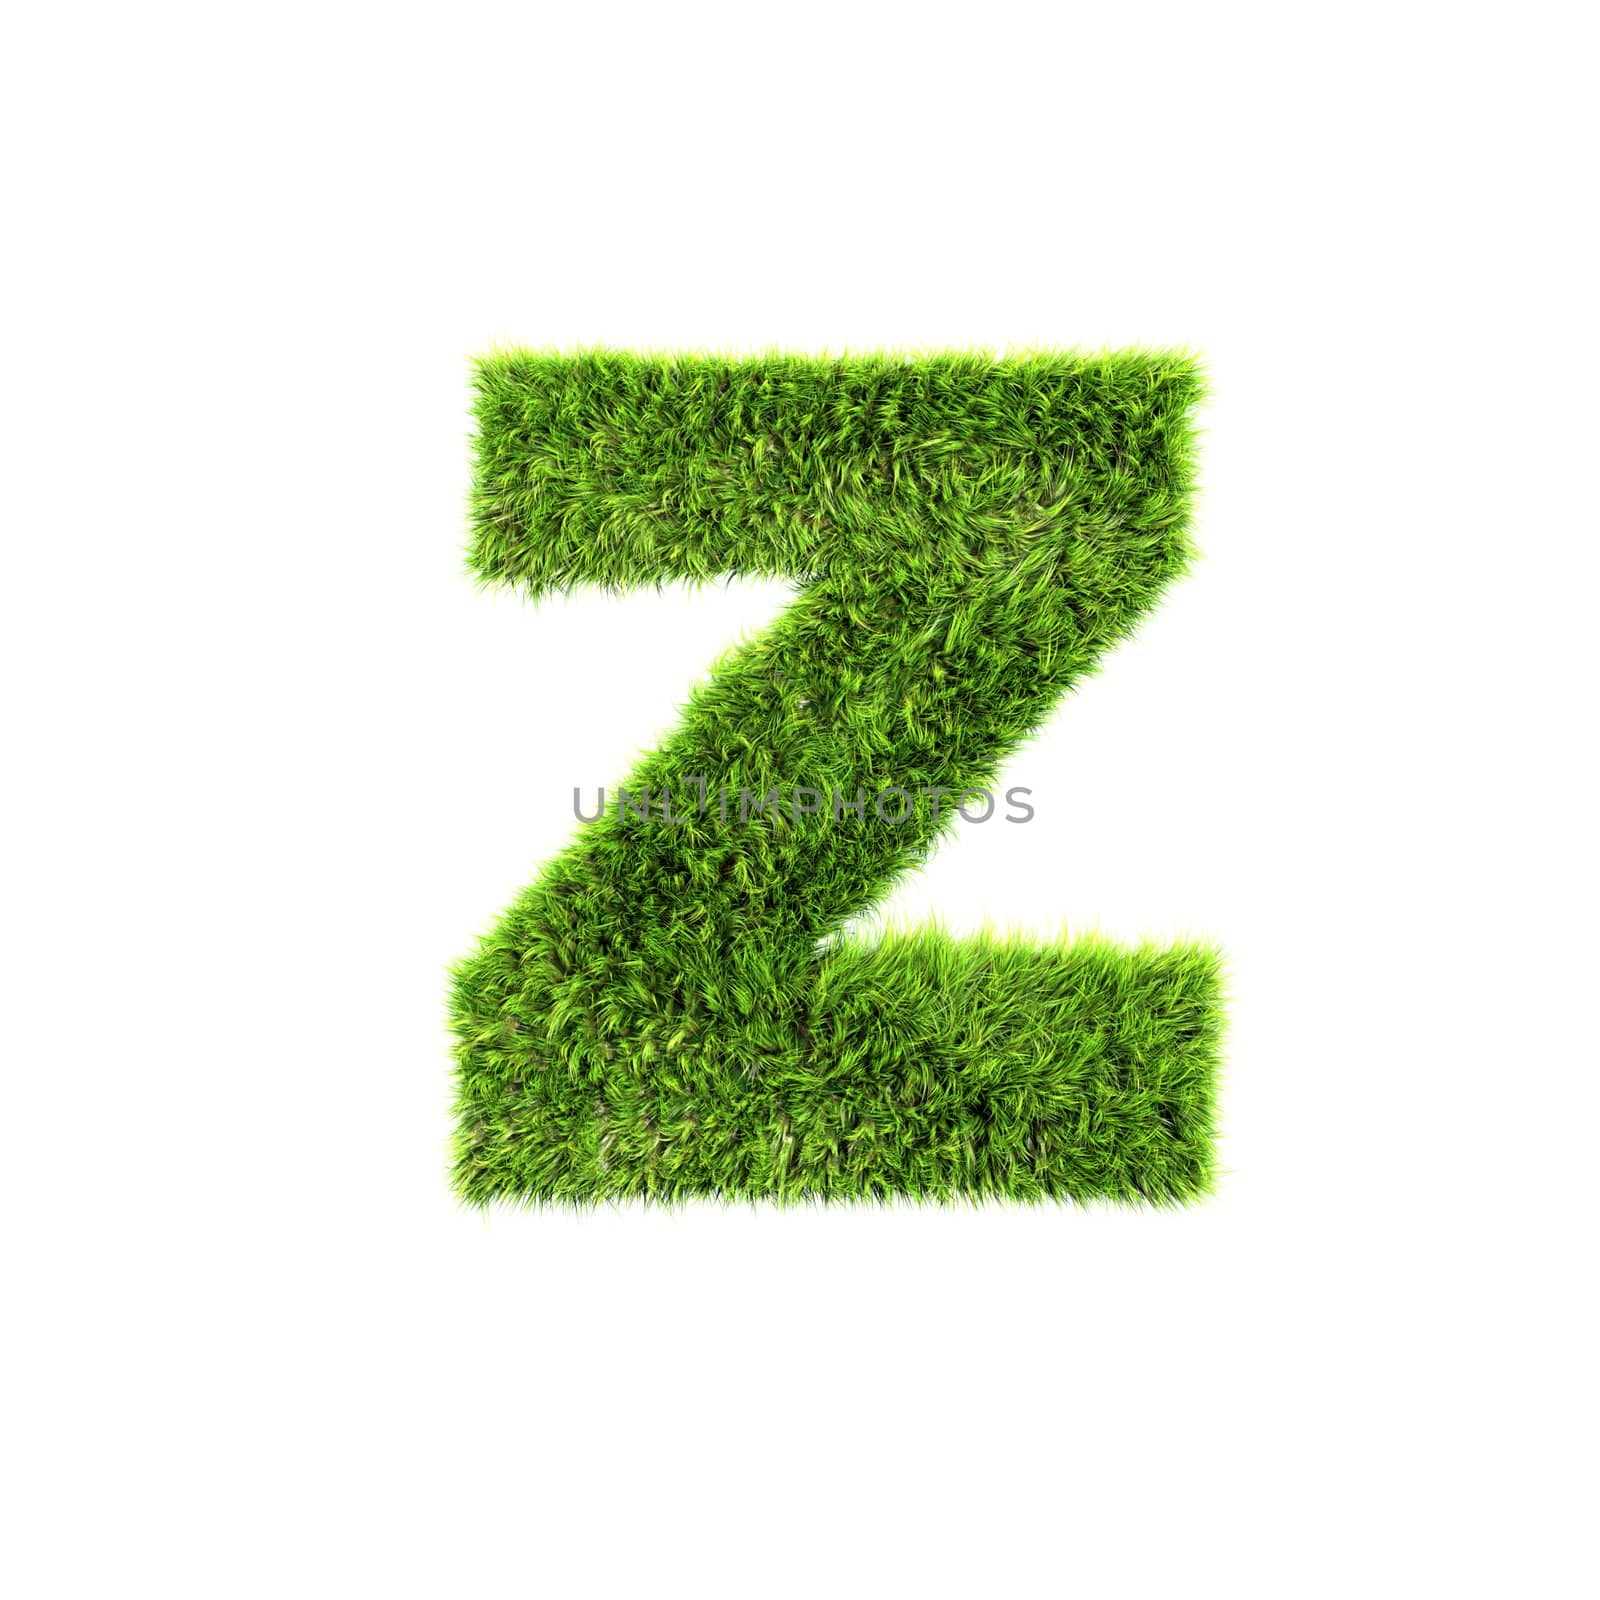 3d grass letter isolated on white background - z